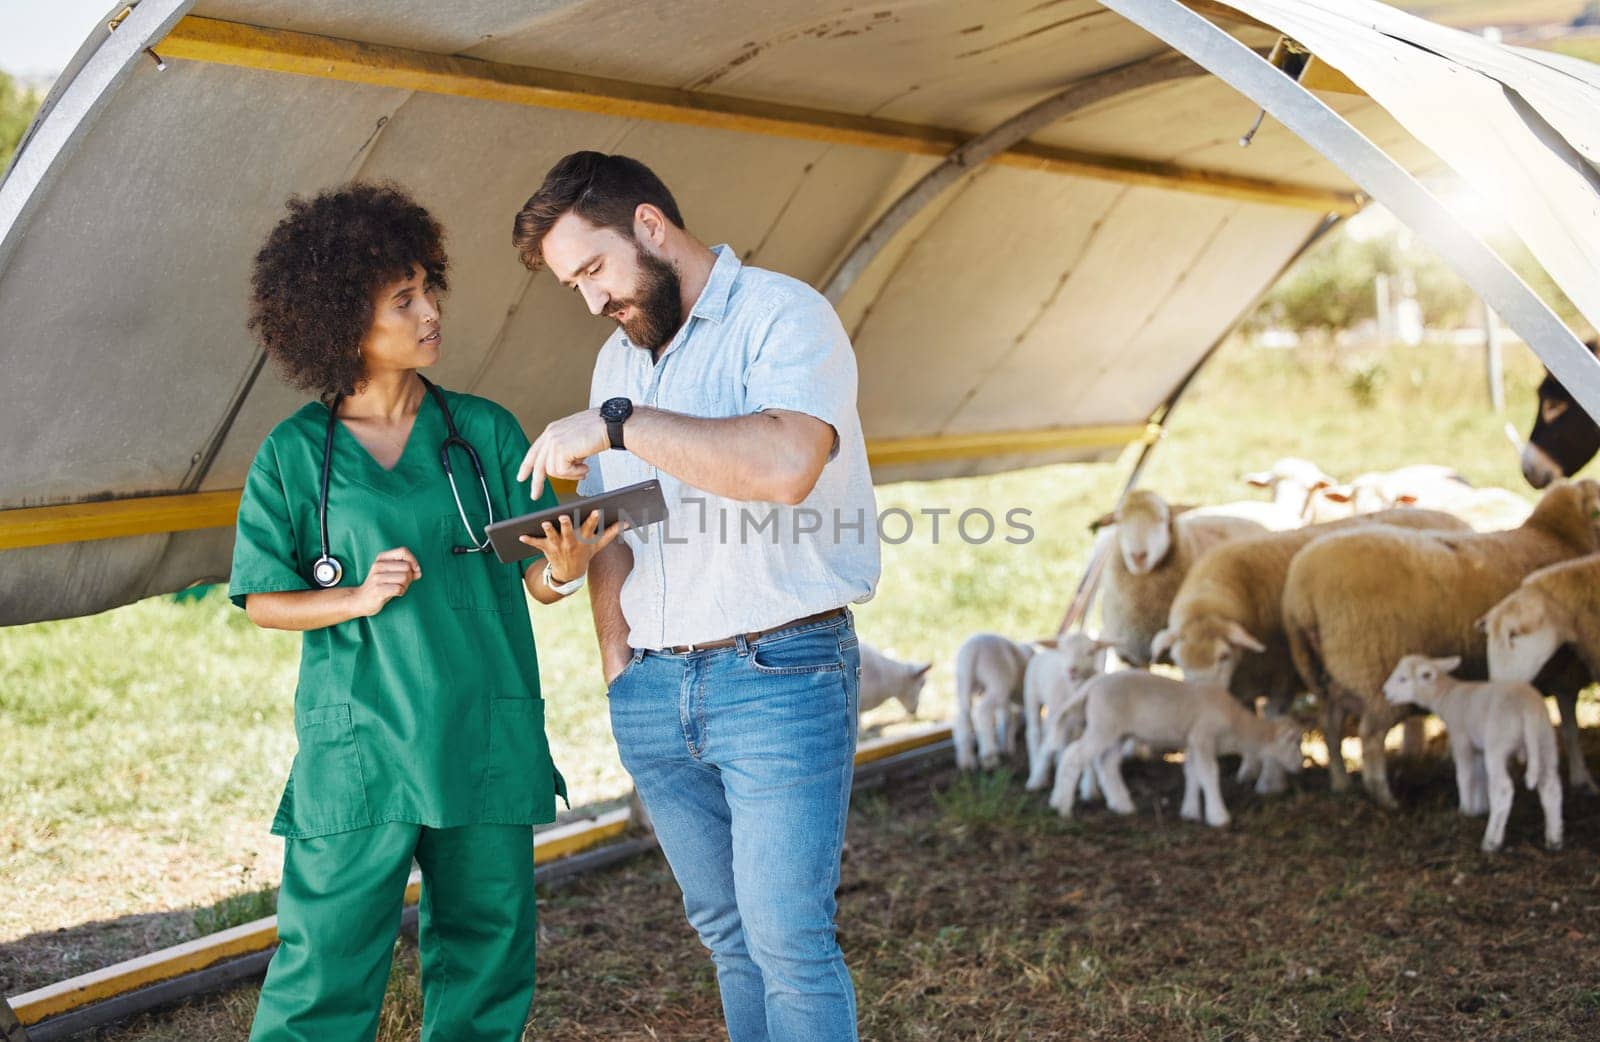 Vet, tablet and farmer or people with sheep medical data, results or online review for healthcare inspection. 5g tech, farming and agriculture animals with black woman nurse and small business owner.